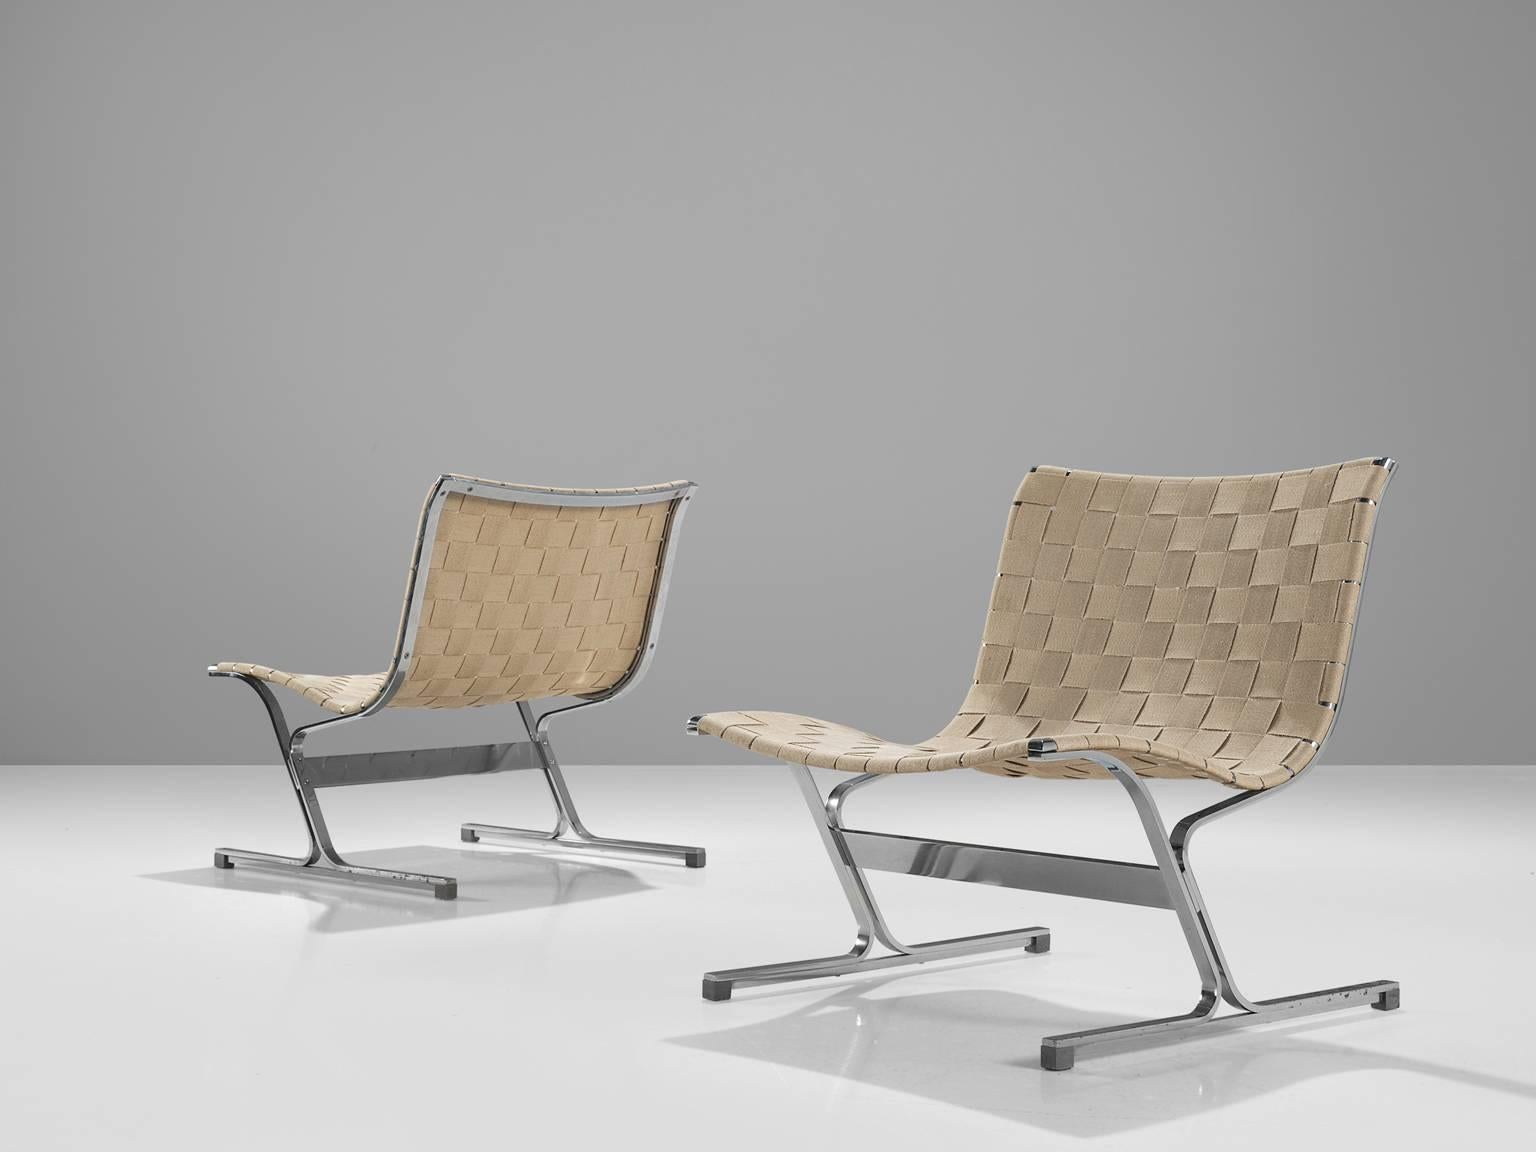 Ross Litell, set of two 'Luar' slipper chairs, metal and canvas, Italy, 1965. 

This set of two modern easy chairs in chromed metal and woven canvas upholstery. Is designed by Ross Litell These chairs show beautiful curves in the canvas seat. The